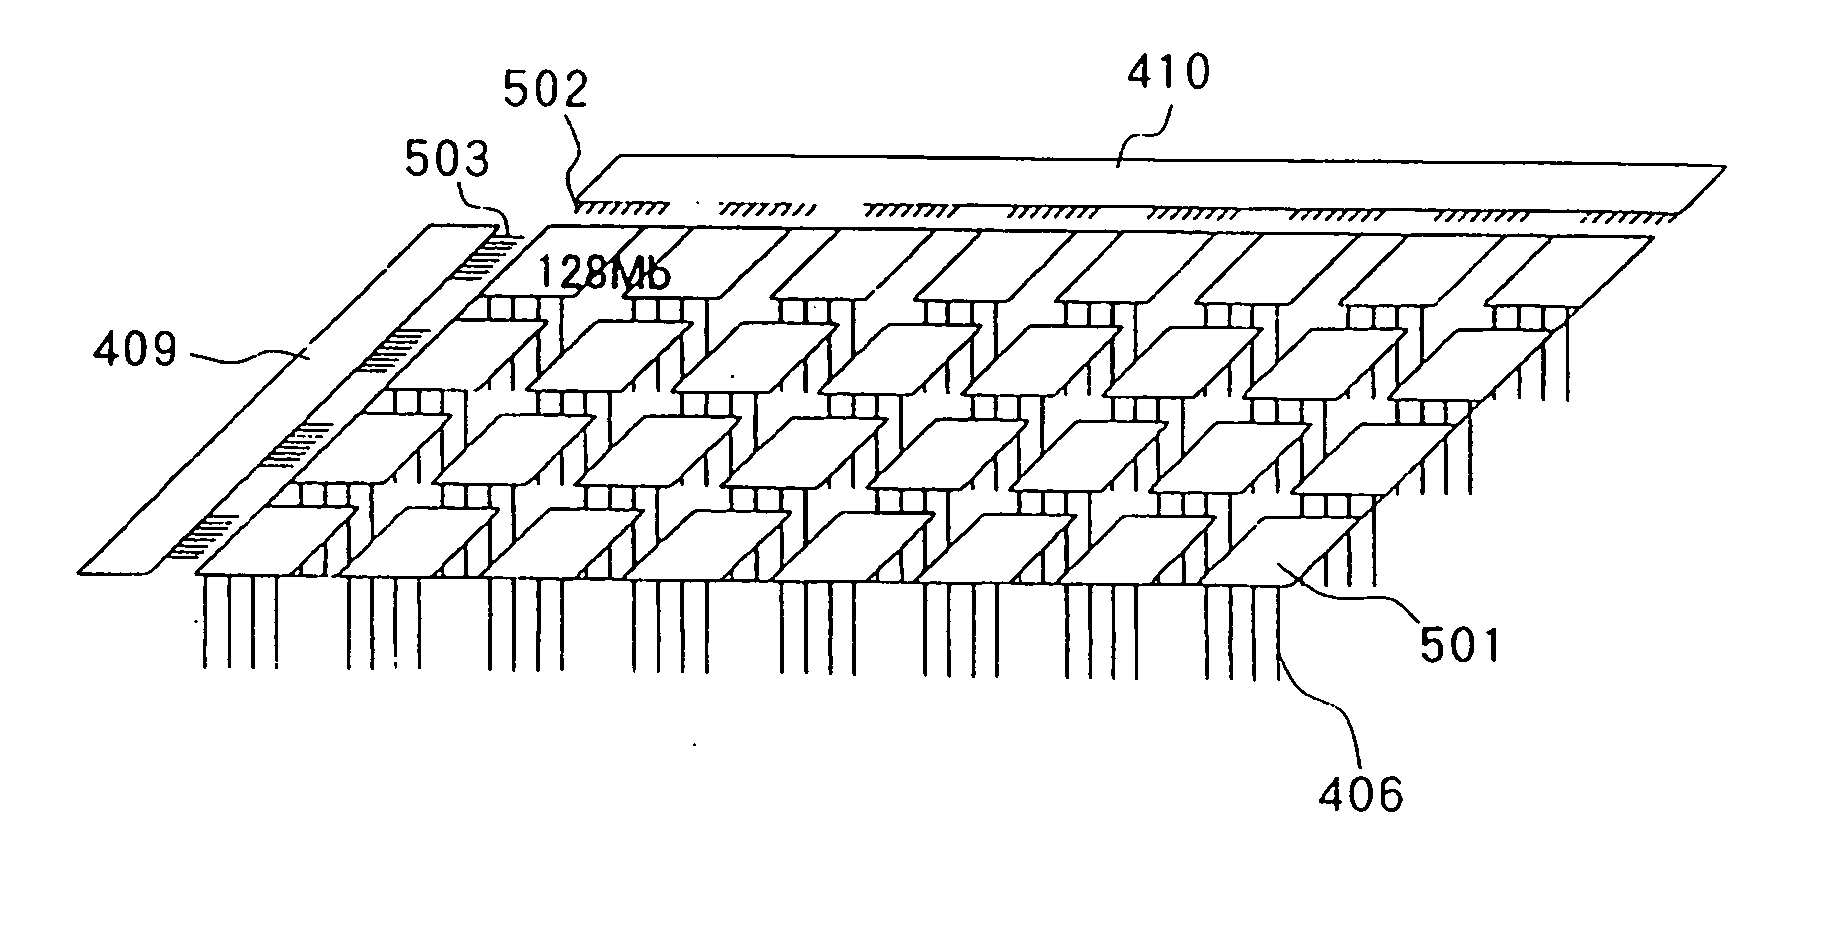 Stacked semiconductor memory device